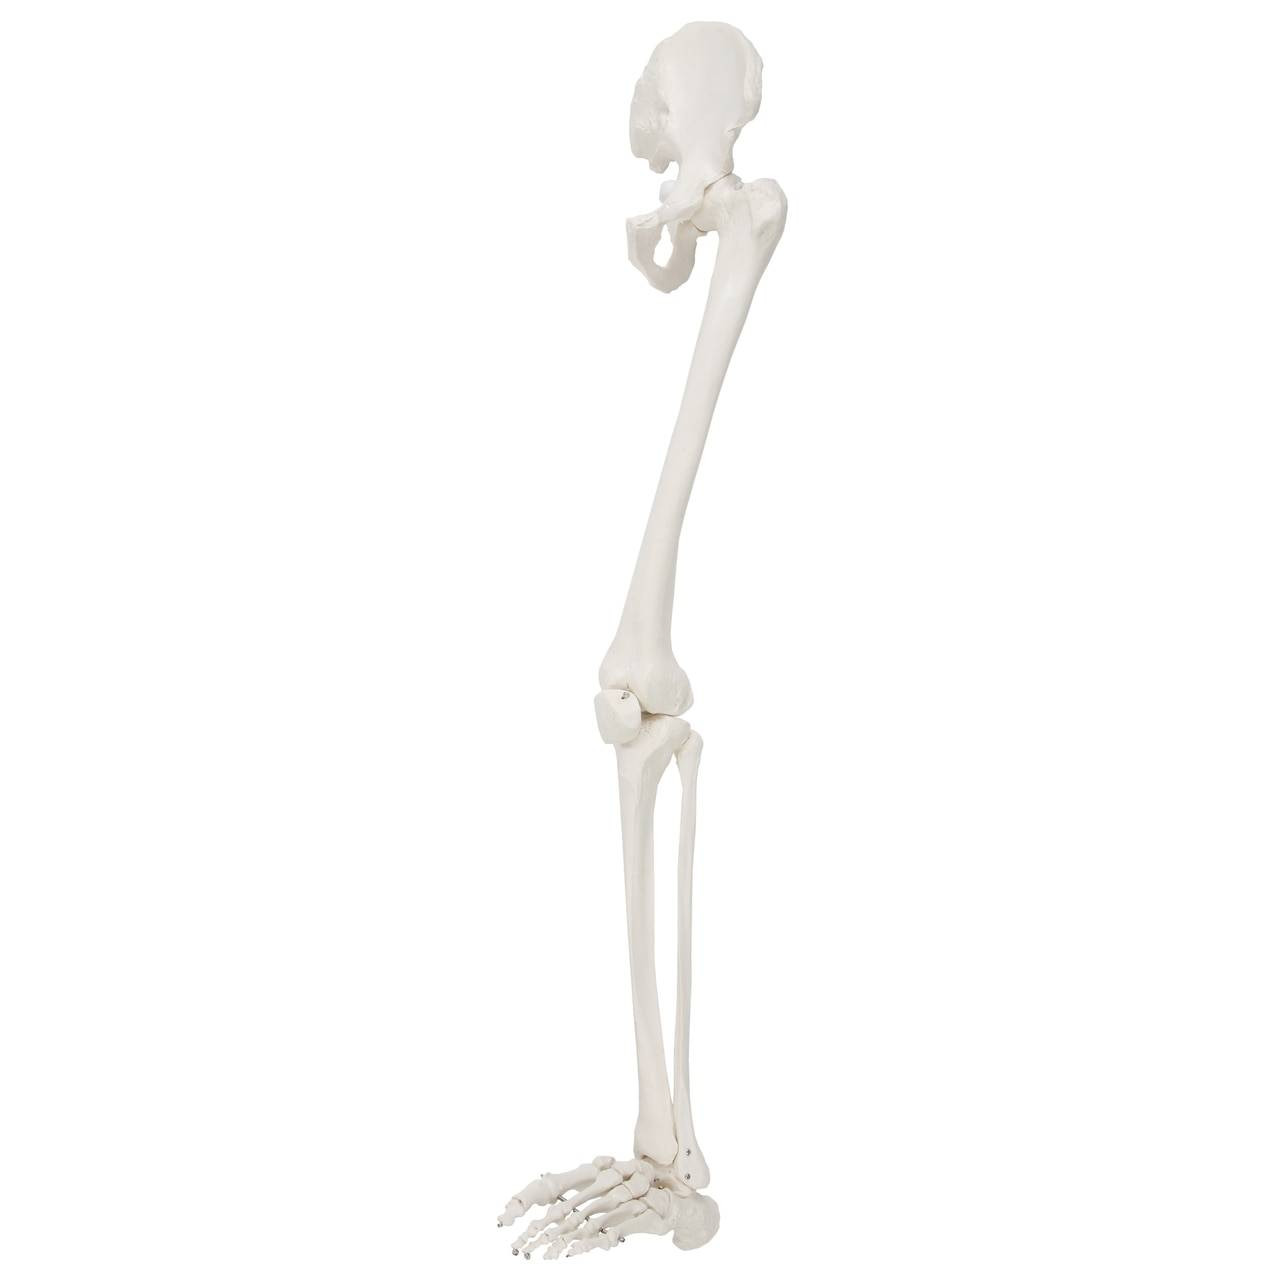 Axis Scientific Life-Size Human Leg Skeleton with Hip Joint and Articulated  Foot Anatomy Model